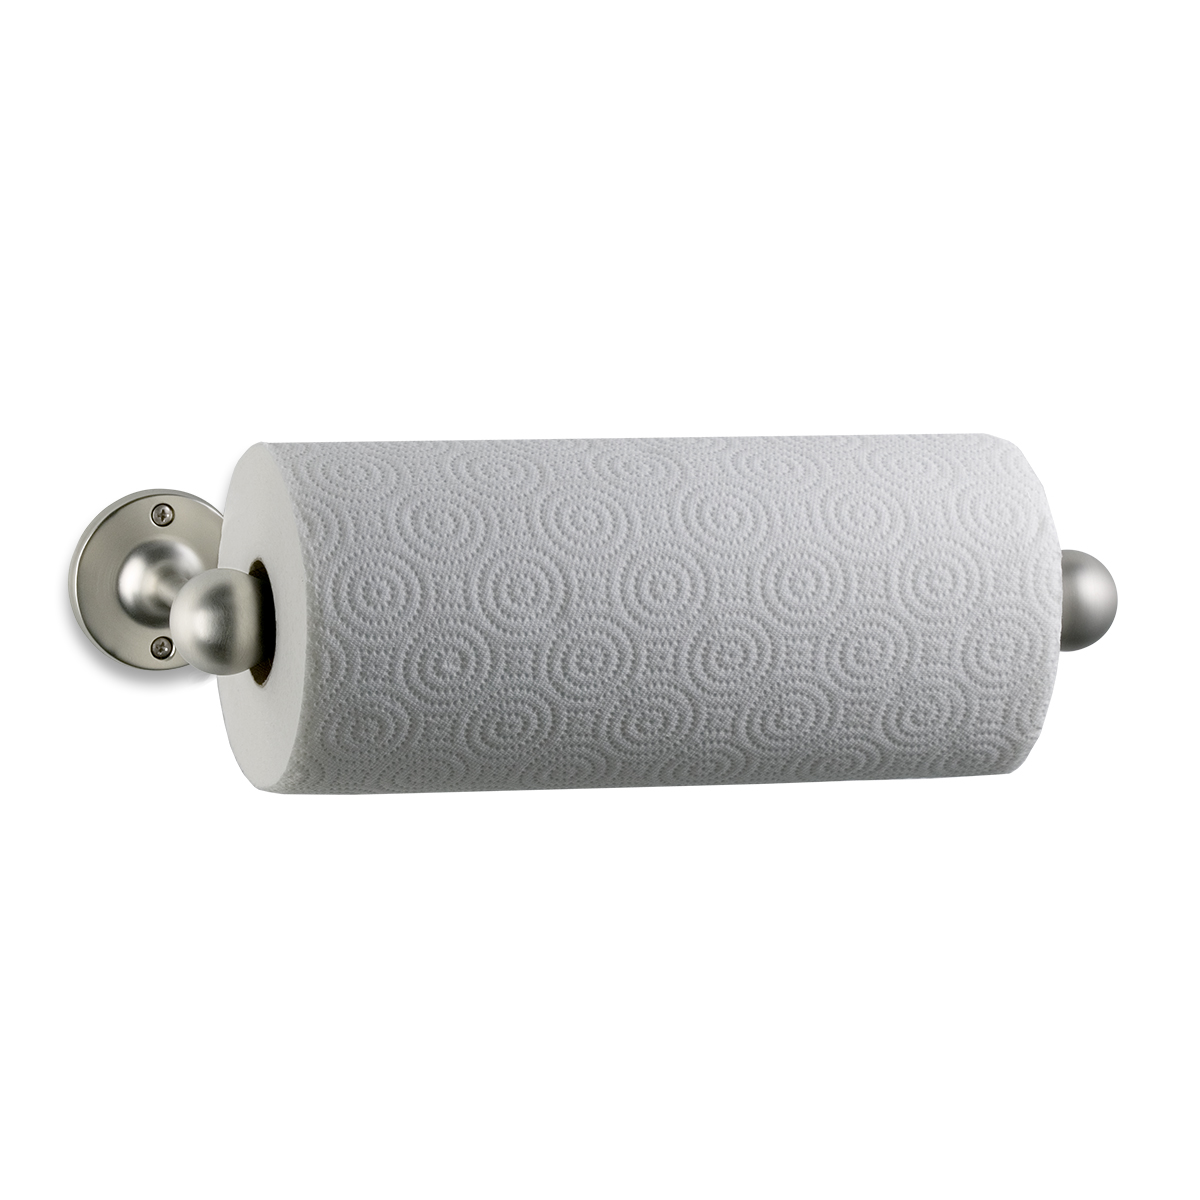 Umbra Nickel Tug Wall-Mount Paper Towel Holder | The Container Store